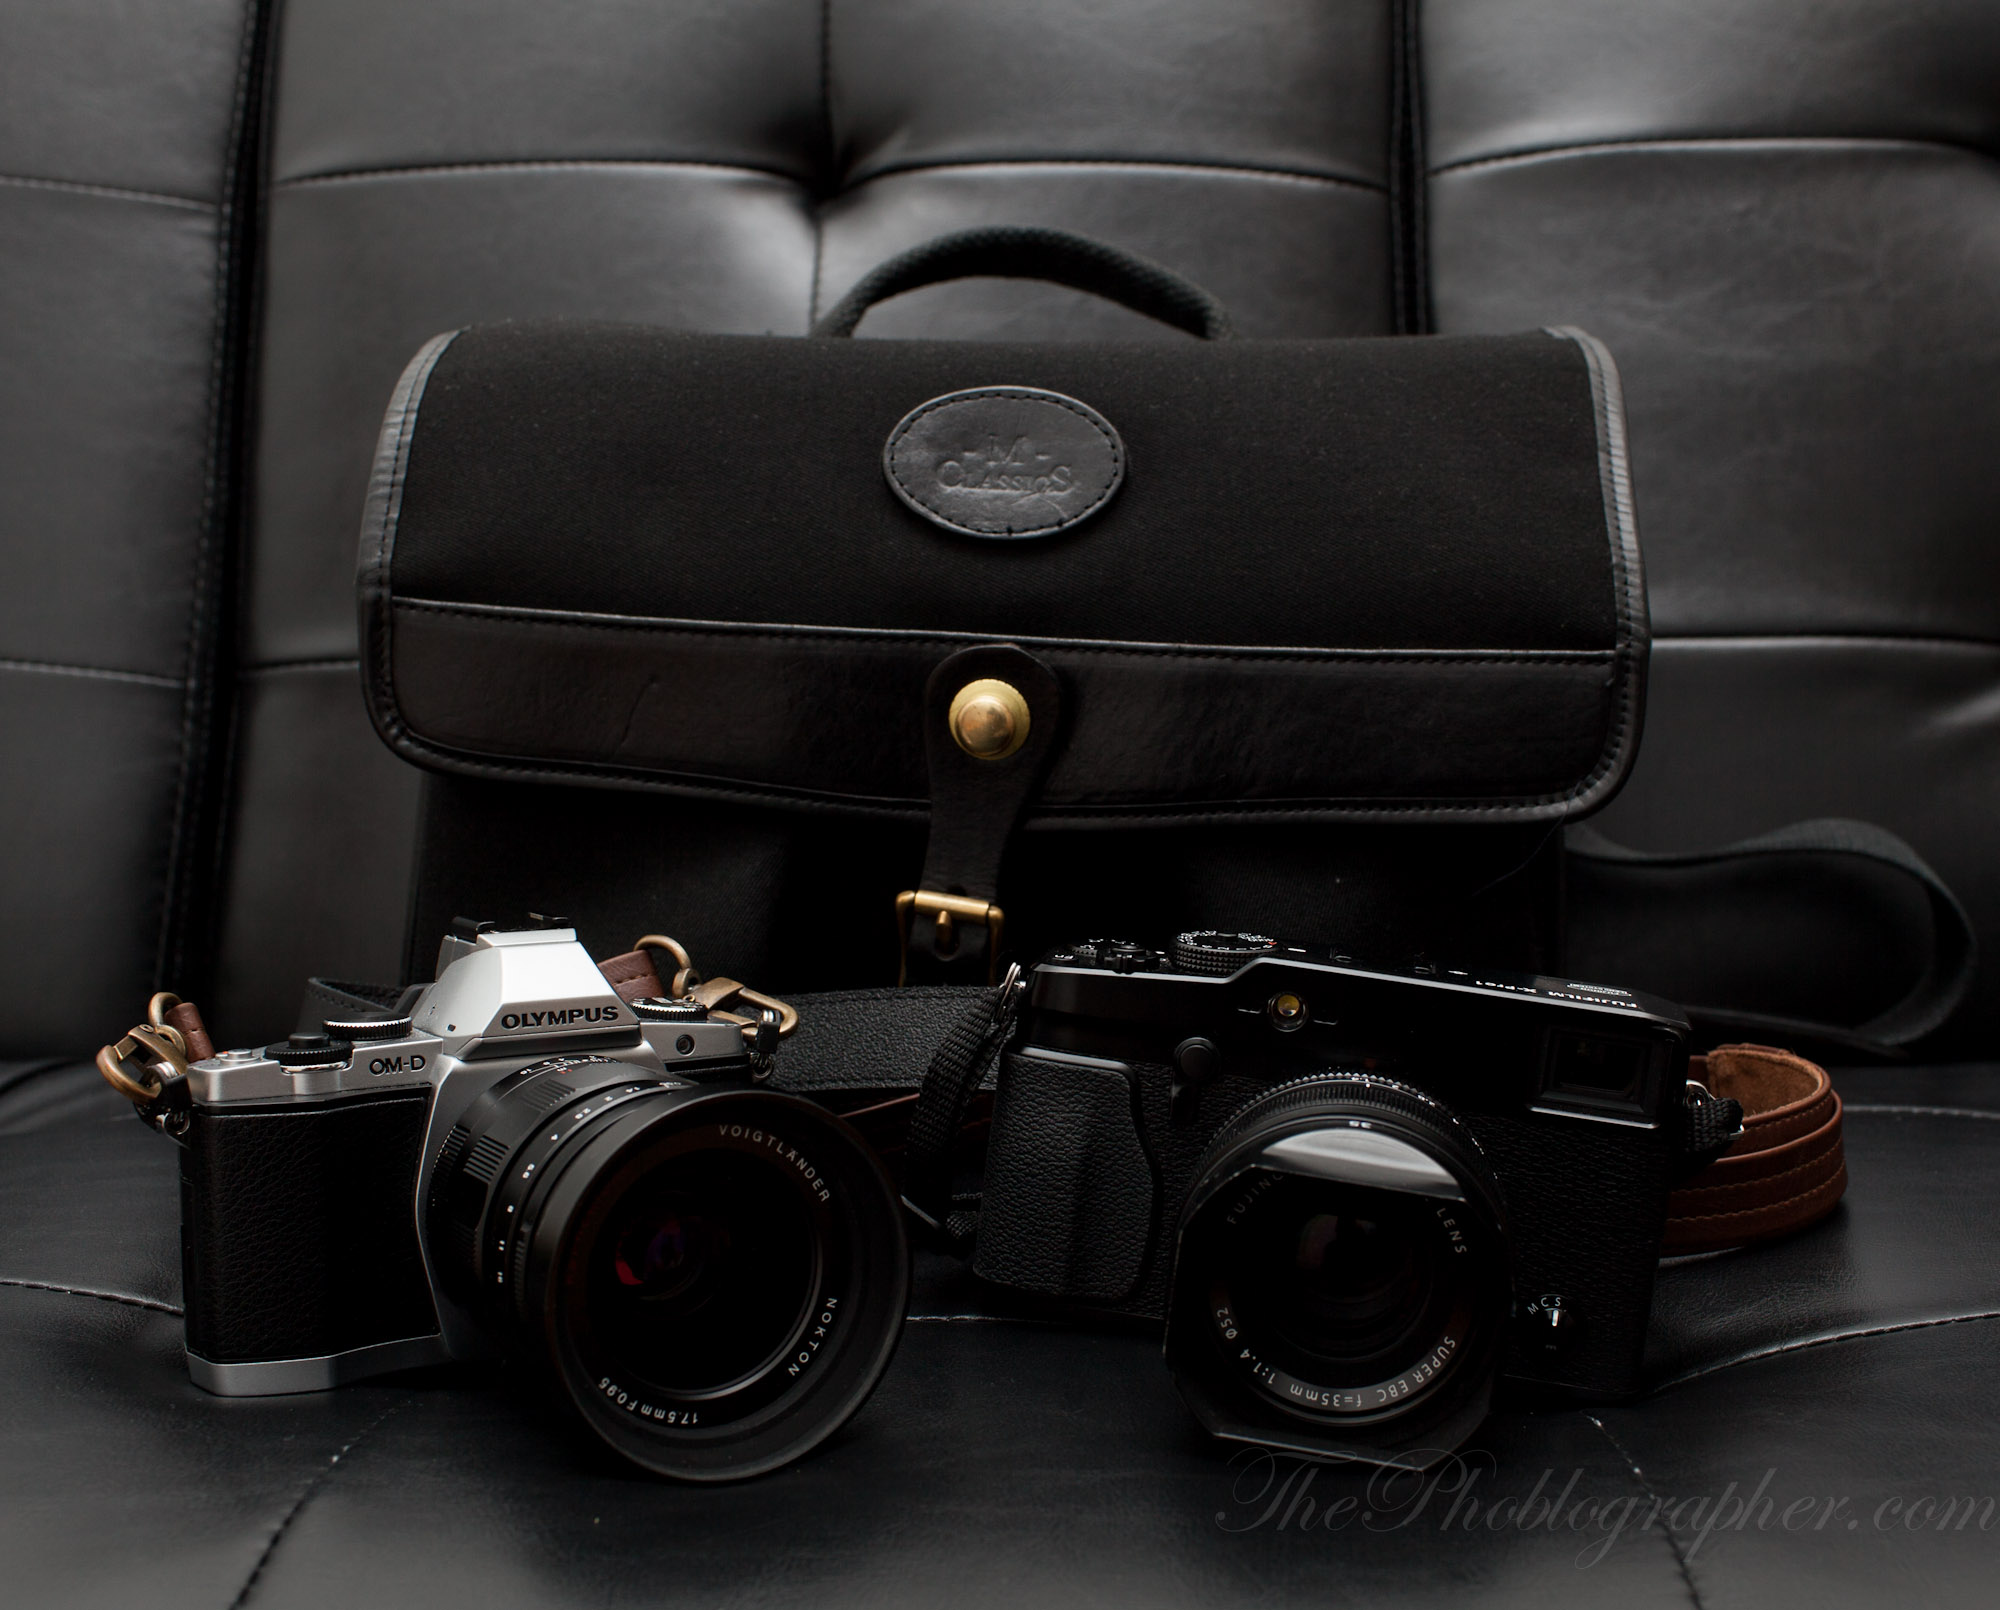 A Weekend of Extended Use With the Fujifilm X Pro 1 and Olympus OMD EM5 (Slightly NSFW)